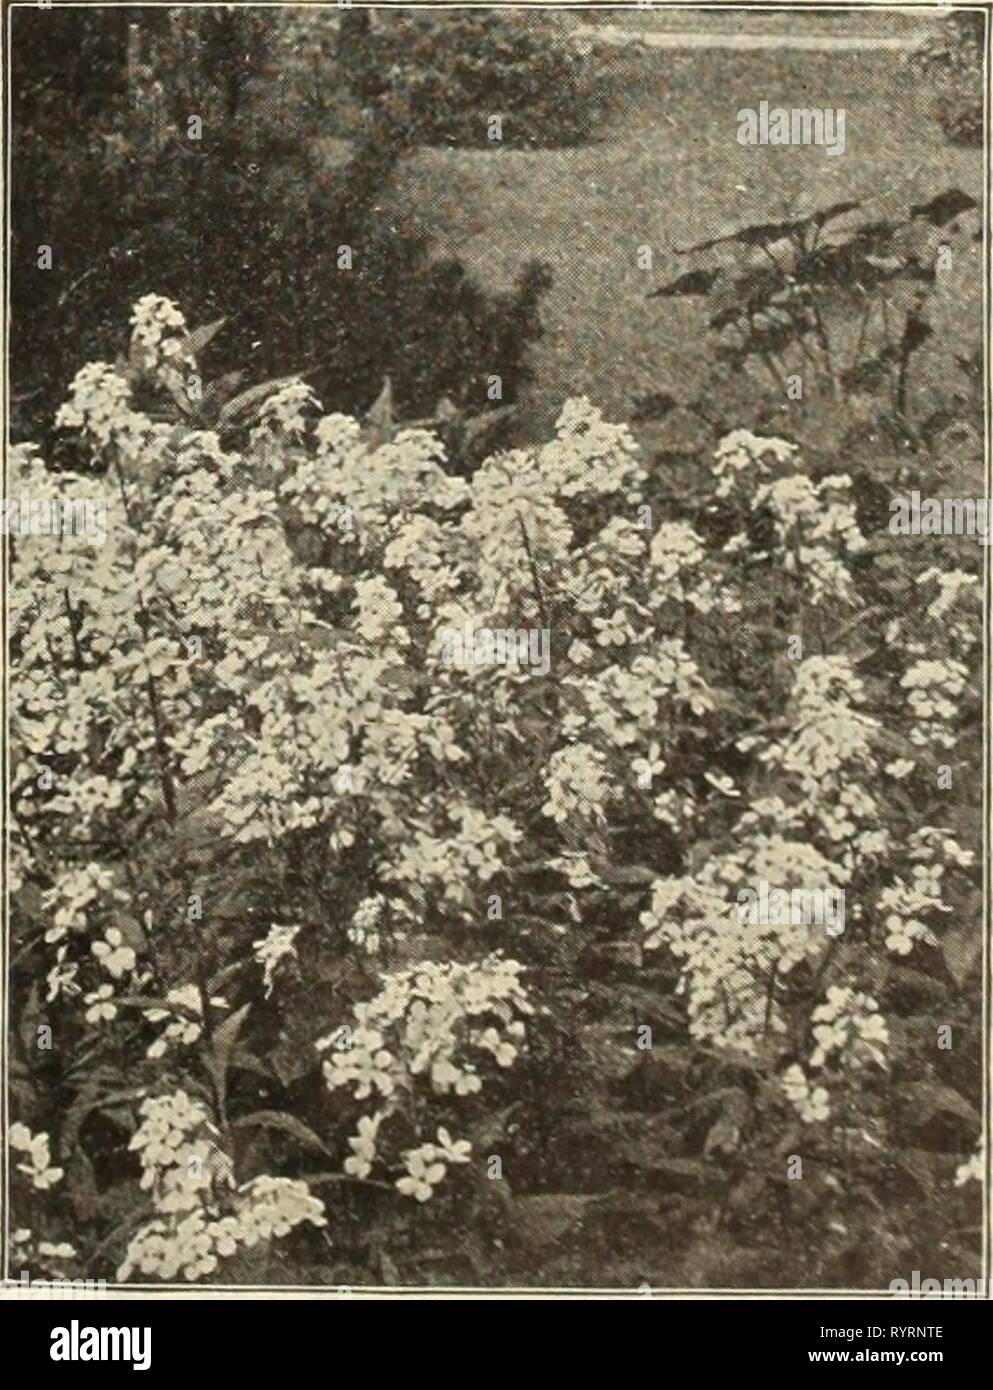 Dreer's mid-summer catalogue 1912 (1912) Dreer's mid-summer catalogue 1912 . dreersmidsummerc1912henr Year: 1912  SWEET WILLIAM Schizanthus. Butterfly or Fringe Flower. This 's. one of the airiest and daintest flowers imasinable, they make admirable pot plants for the house, and are charming for window boxes in winter. For this purpose sow in the autumn. Per pkt. Dwarf Large=&gt;flowered. Compact pyramidal plants a foot high, literally covered with large, beautiful orchid-like flowers in a bewildering range of color. J^ oz., 50 cts. ... 15 Wisetonensis. Largely used as a pot plant for the hous Stock Photo